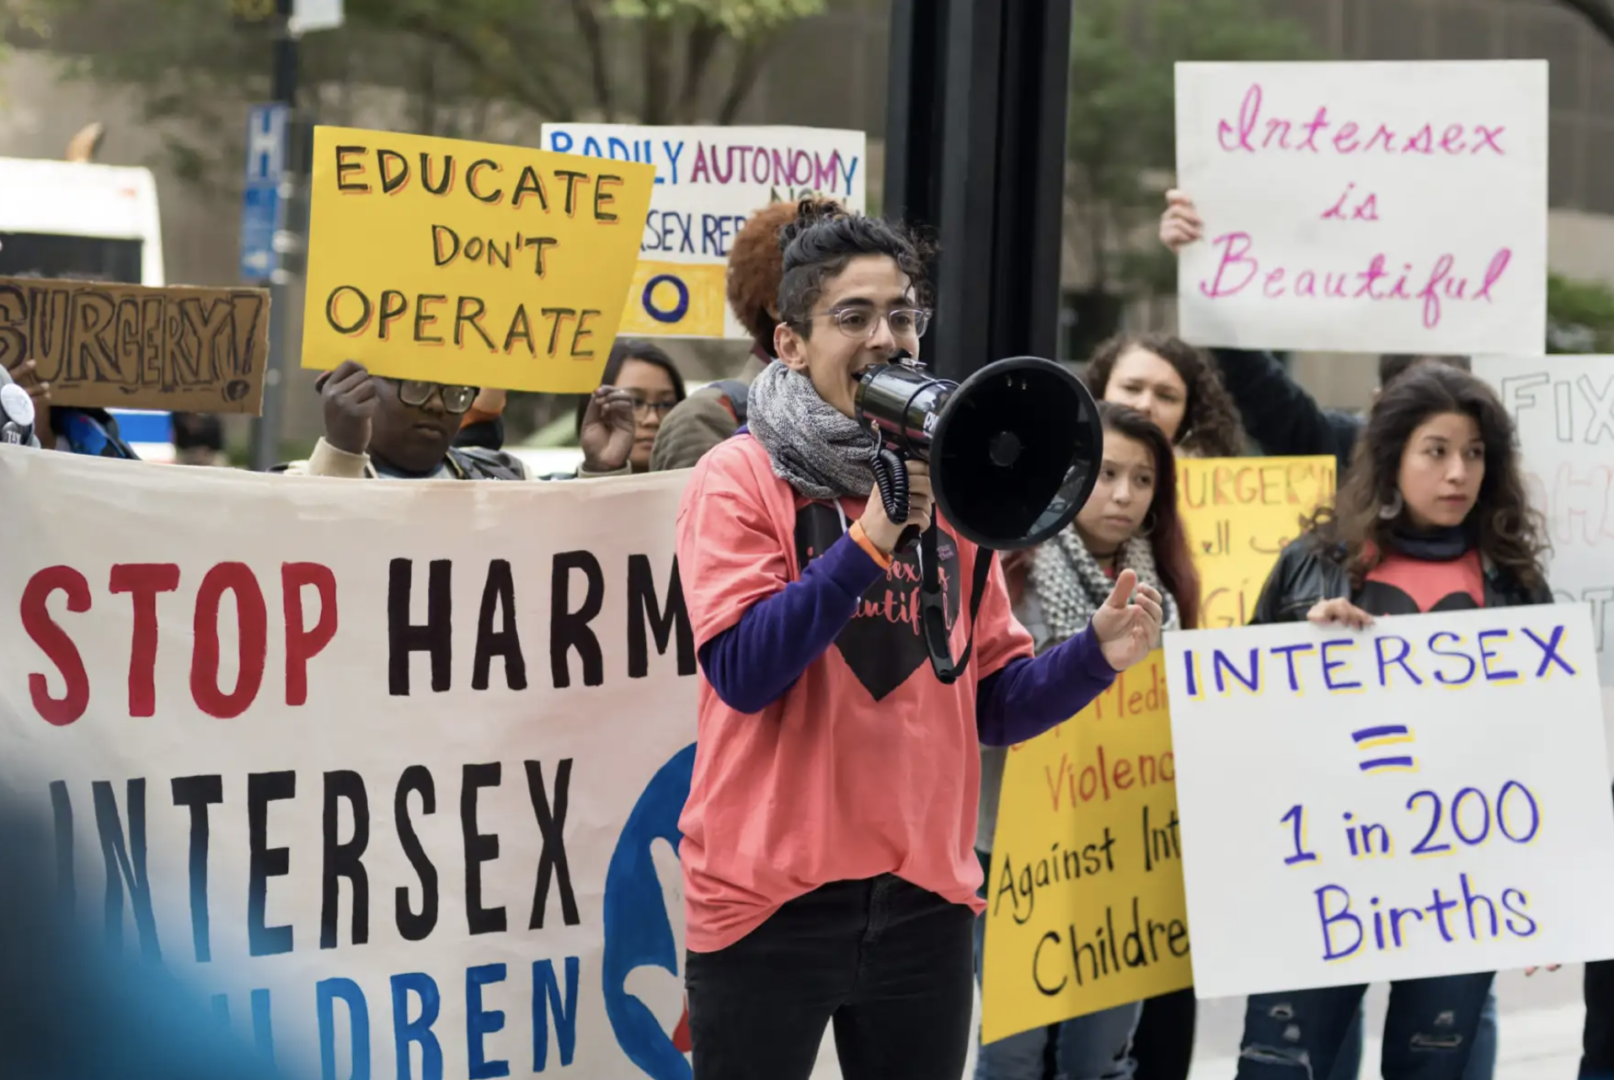 Pidgeon Pagonis, co-founder of the Intersex Justice Project, at a protest in 2017. (SARAH-JI, INTERSEX JUSTICE PROJECT)